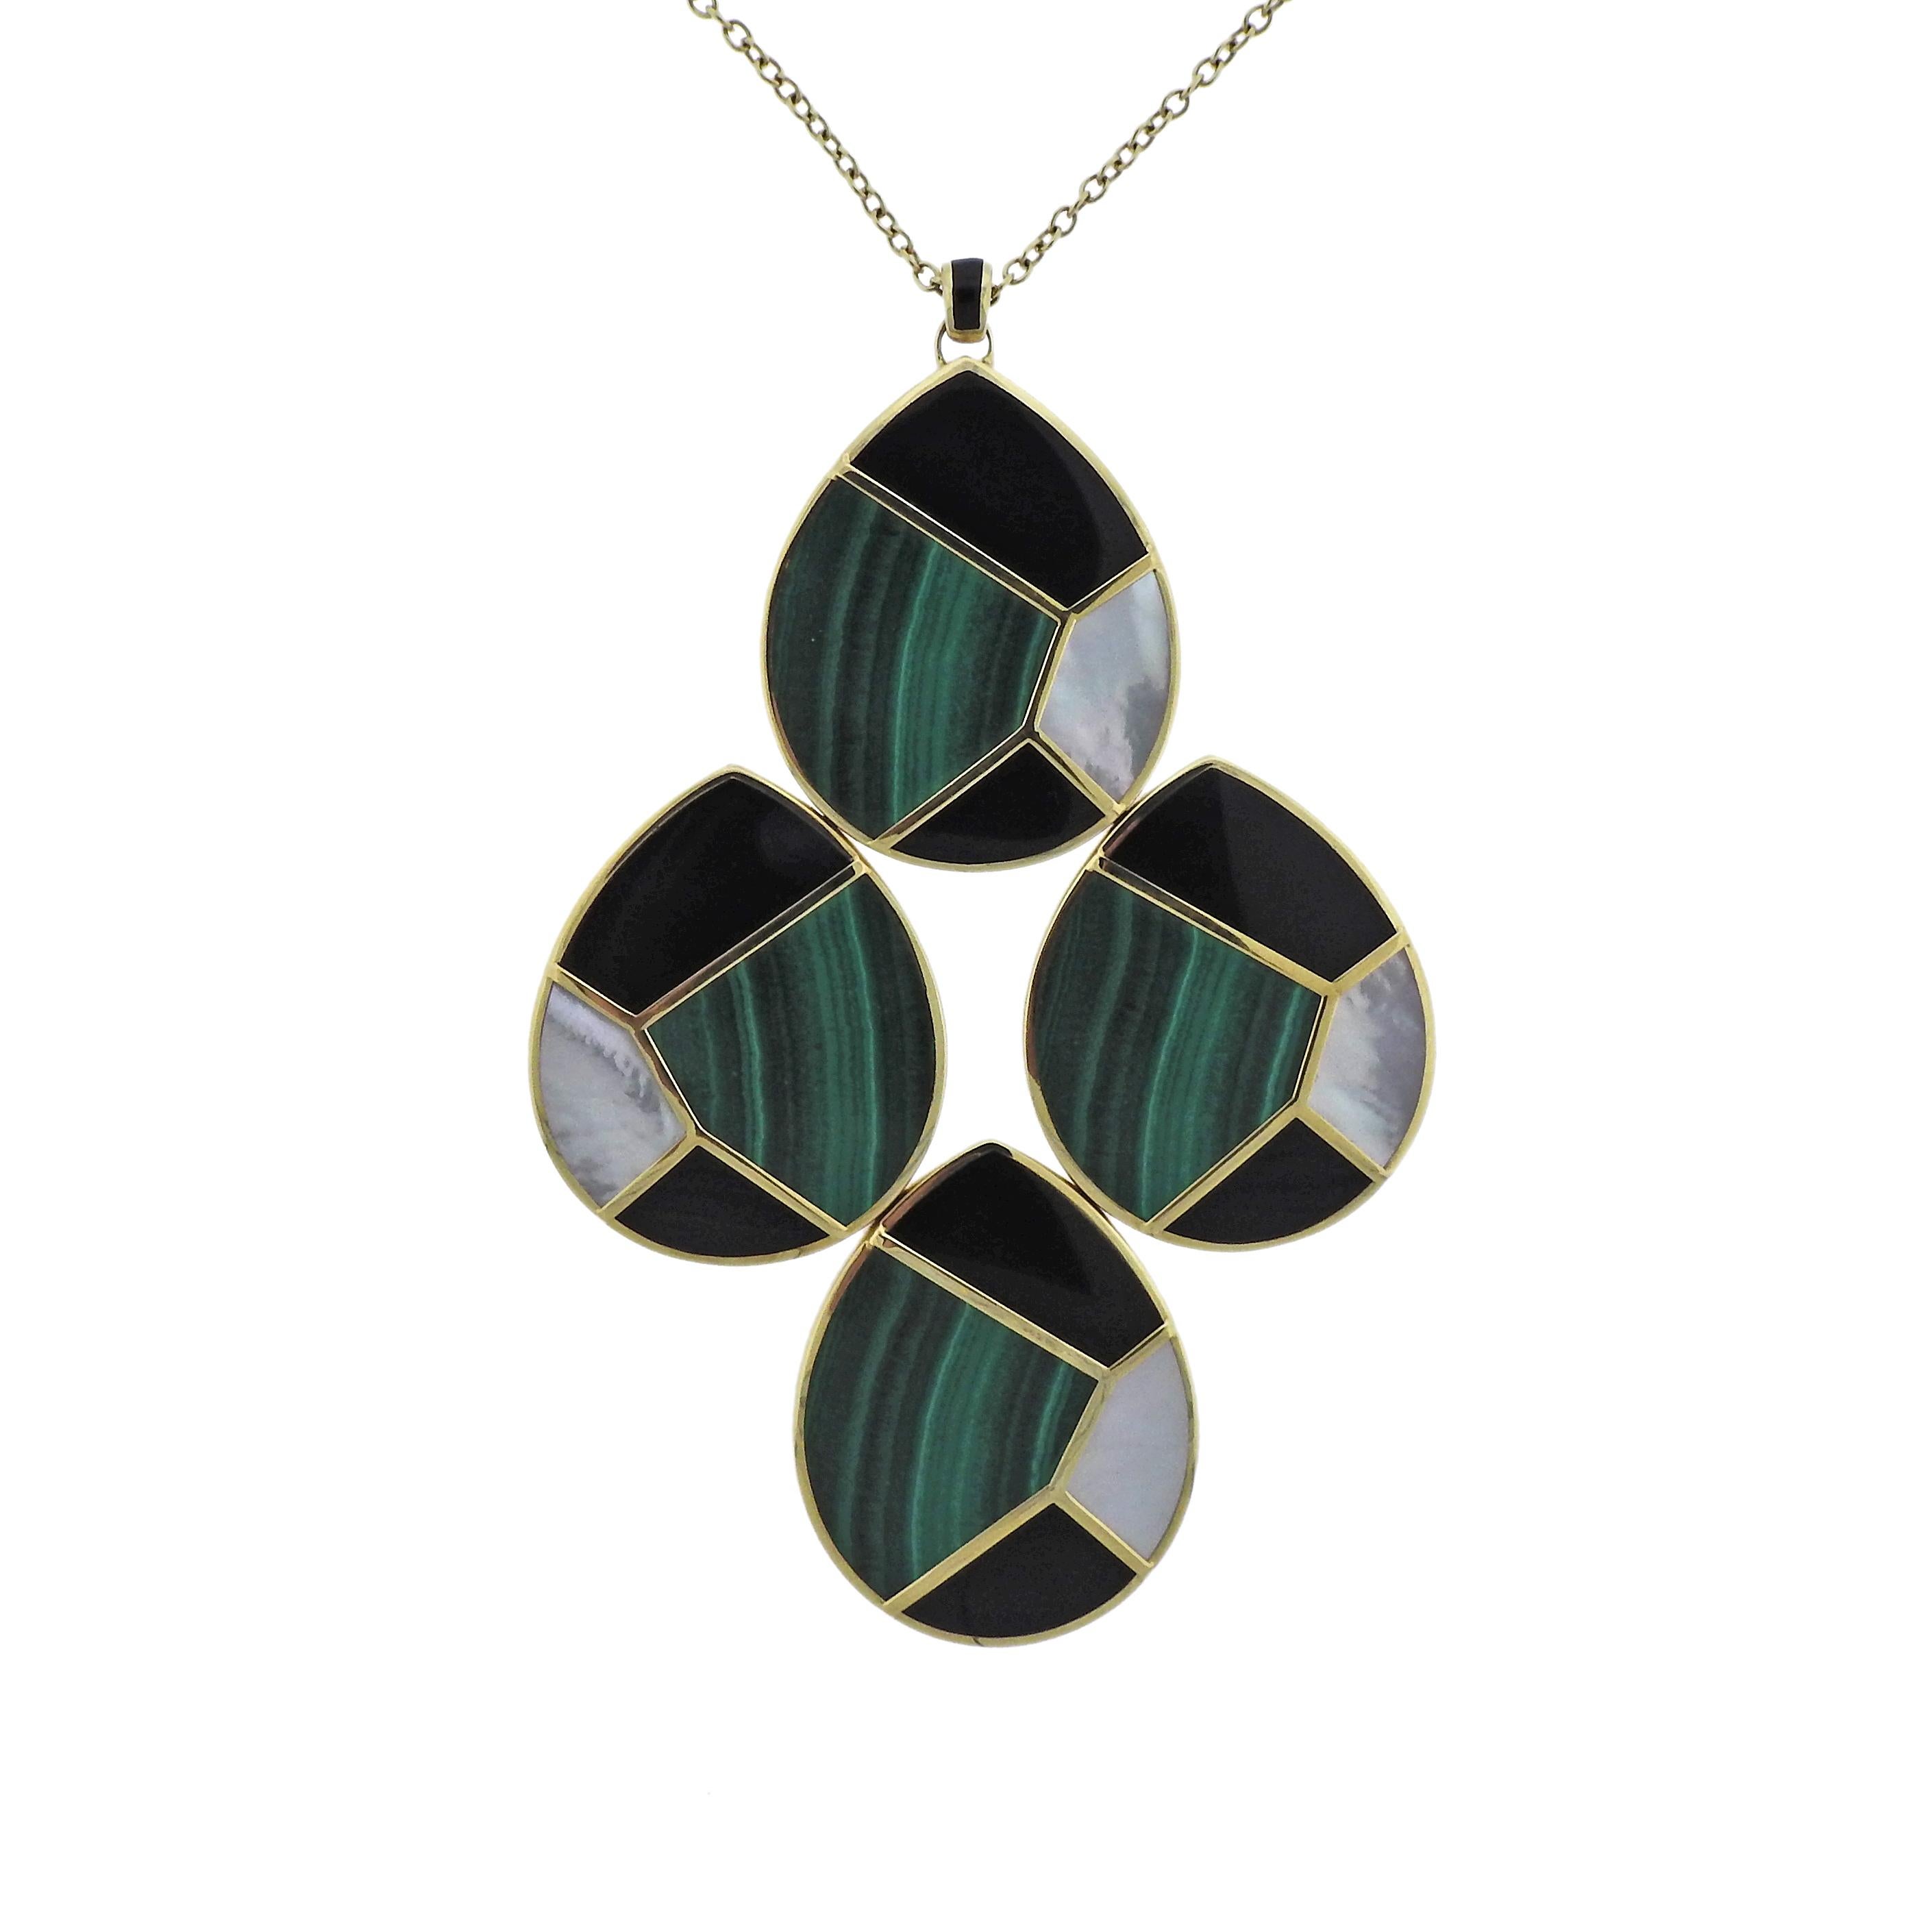 18k gold necklace by ippolita, featuring large pendant, set with malachite, mother of pearl and onyx.  Necklace is 26